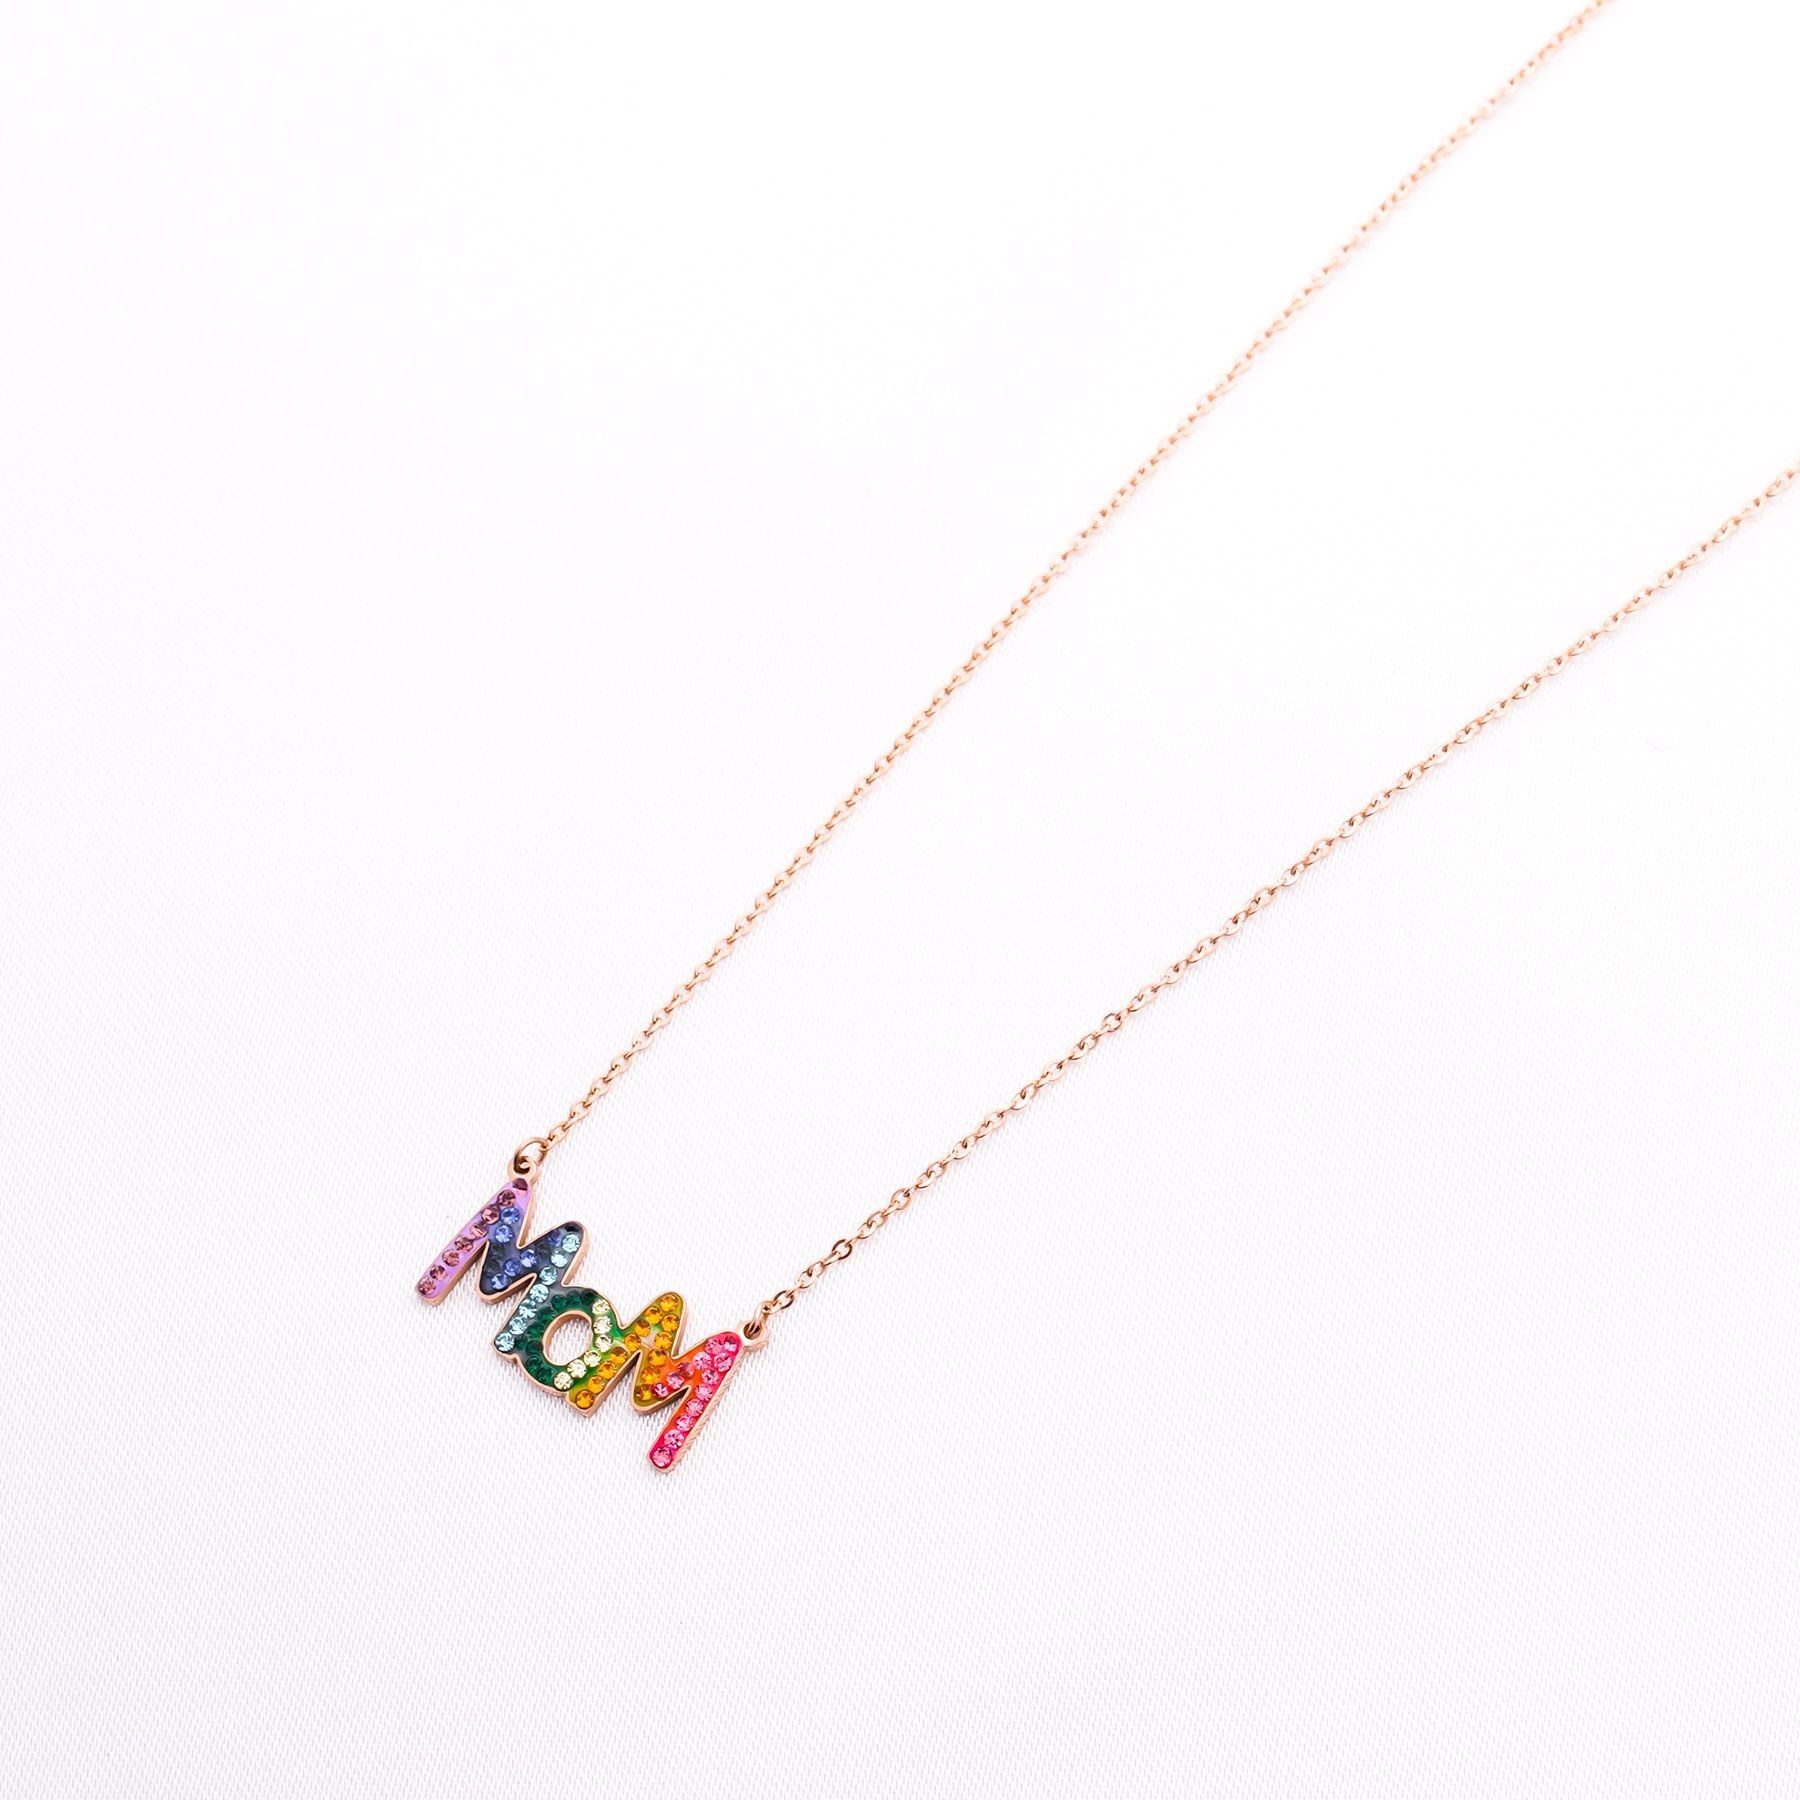 MOM NECKLACE - ROSE GOLD ' - ' ΜΑΜΑ - ΝΟΝΑ